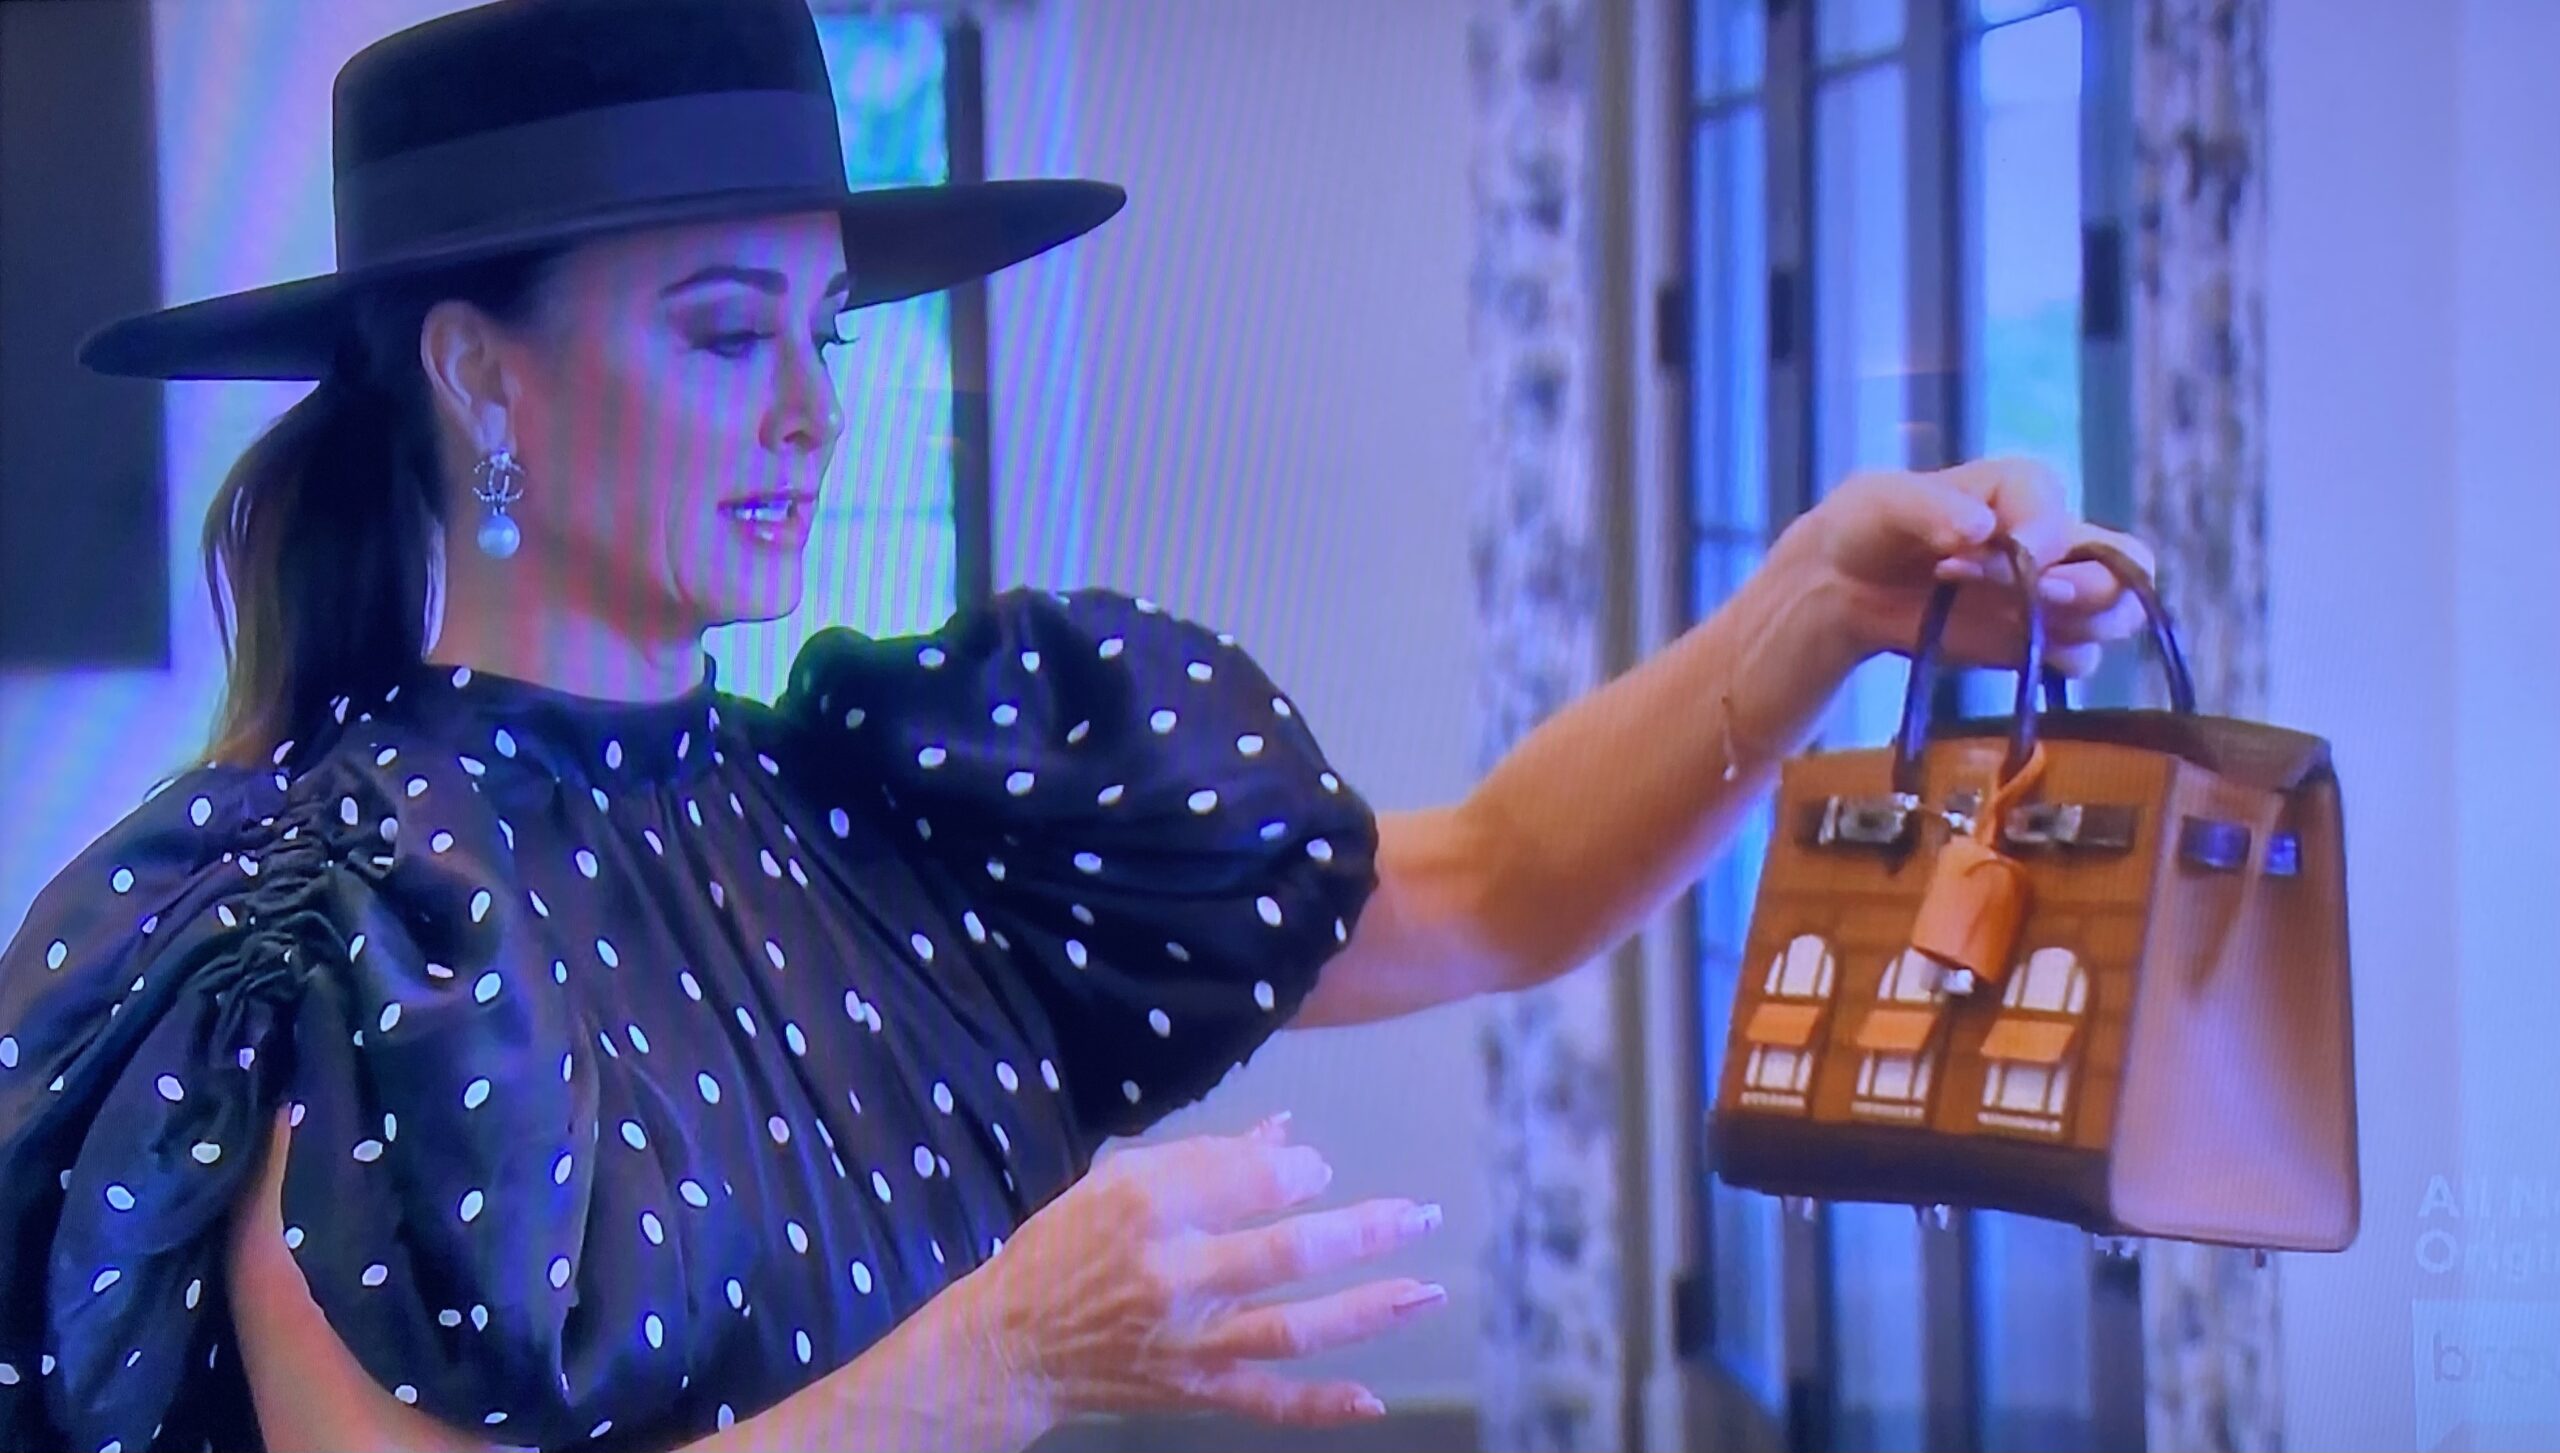 Real Housewife Kyle Richards carries a Birkin in Beverly Hills